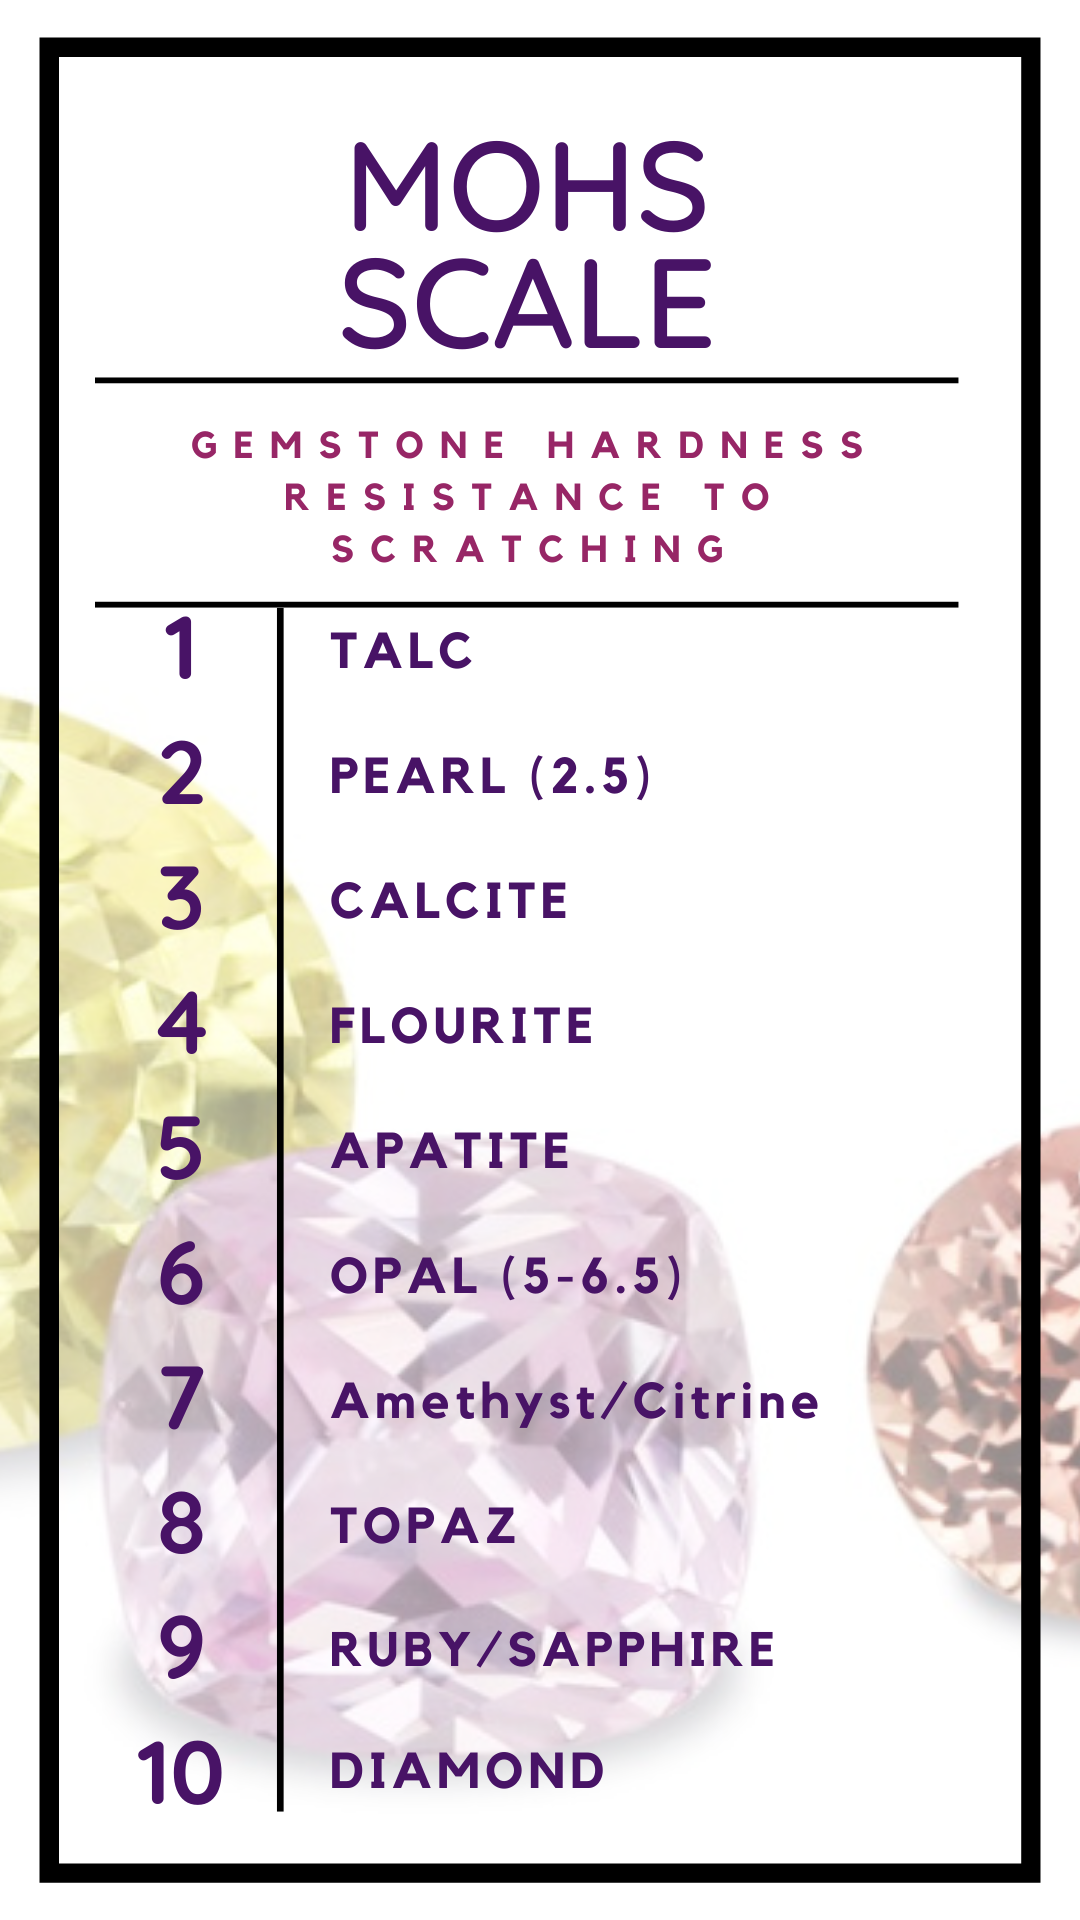 Sample of a Mohs type scale with alternate gemstones